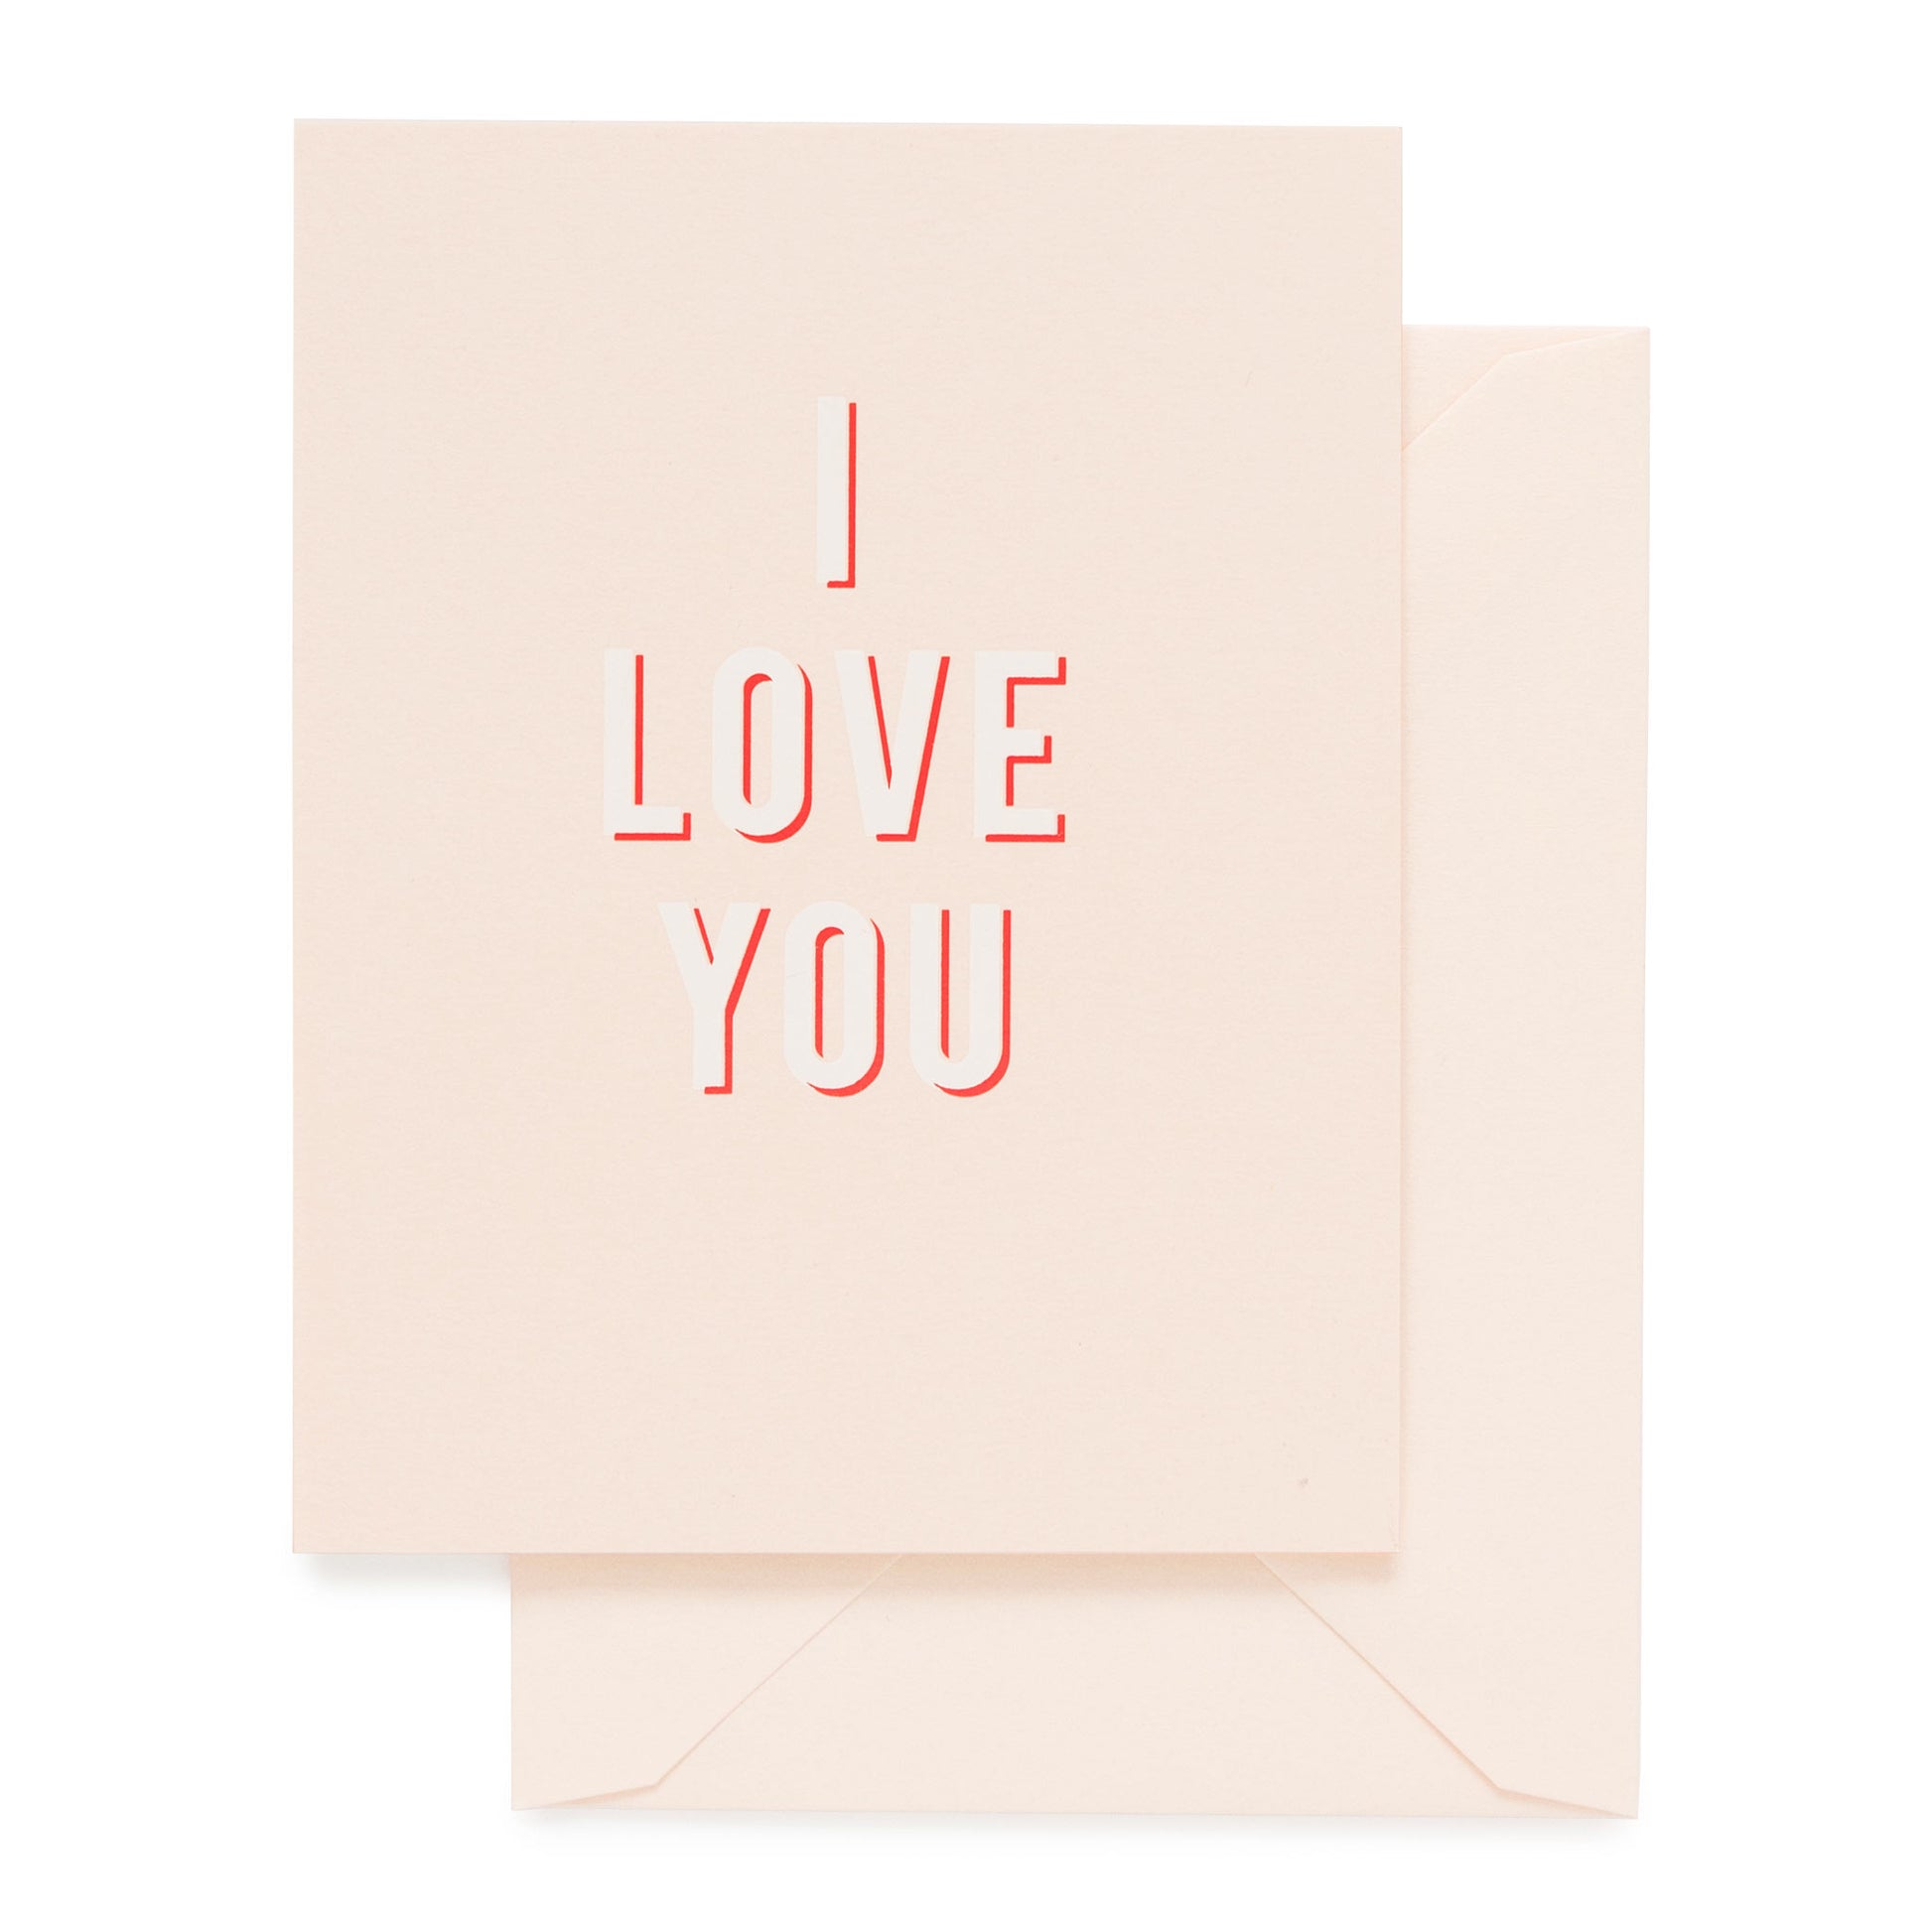 Pale pink card printed with red and white ink I LOVE YOU